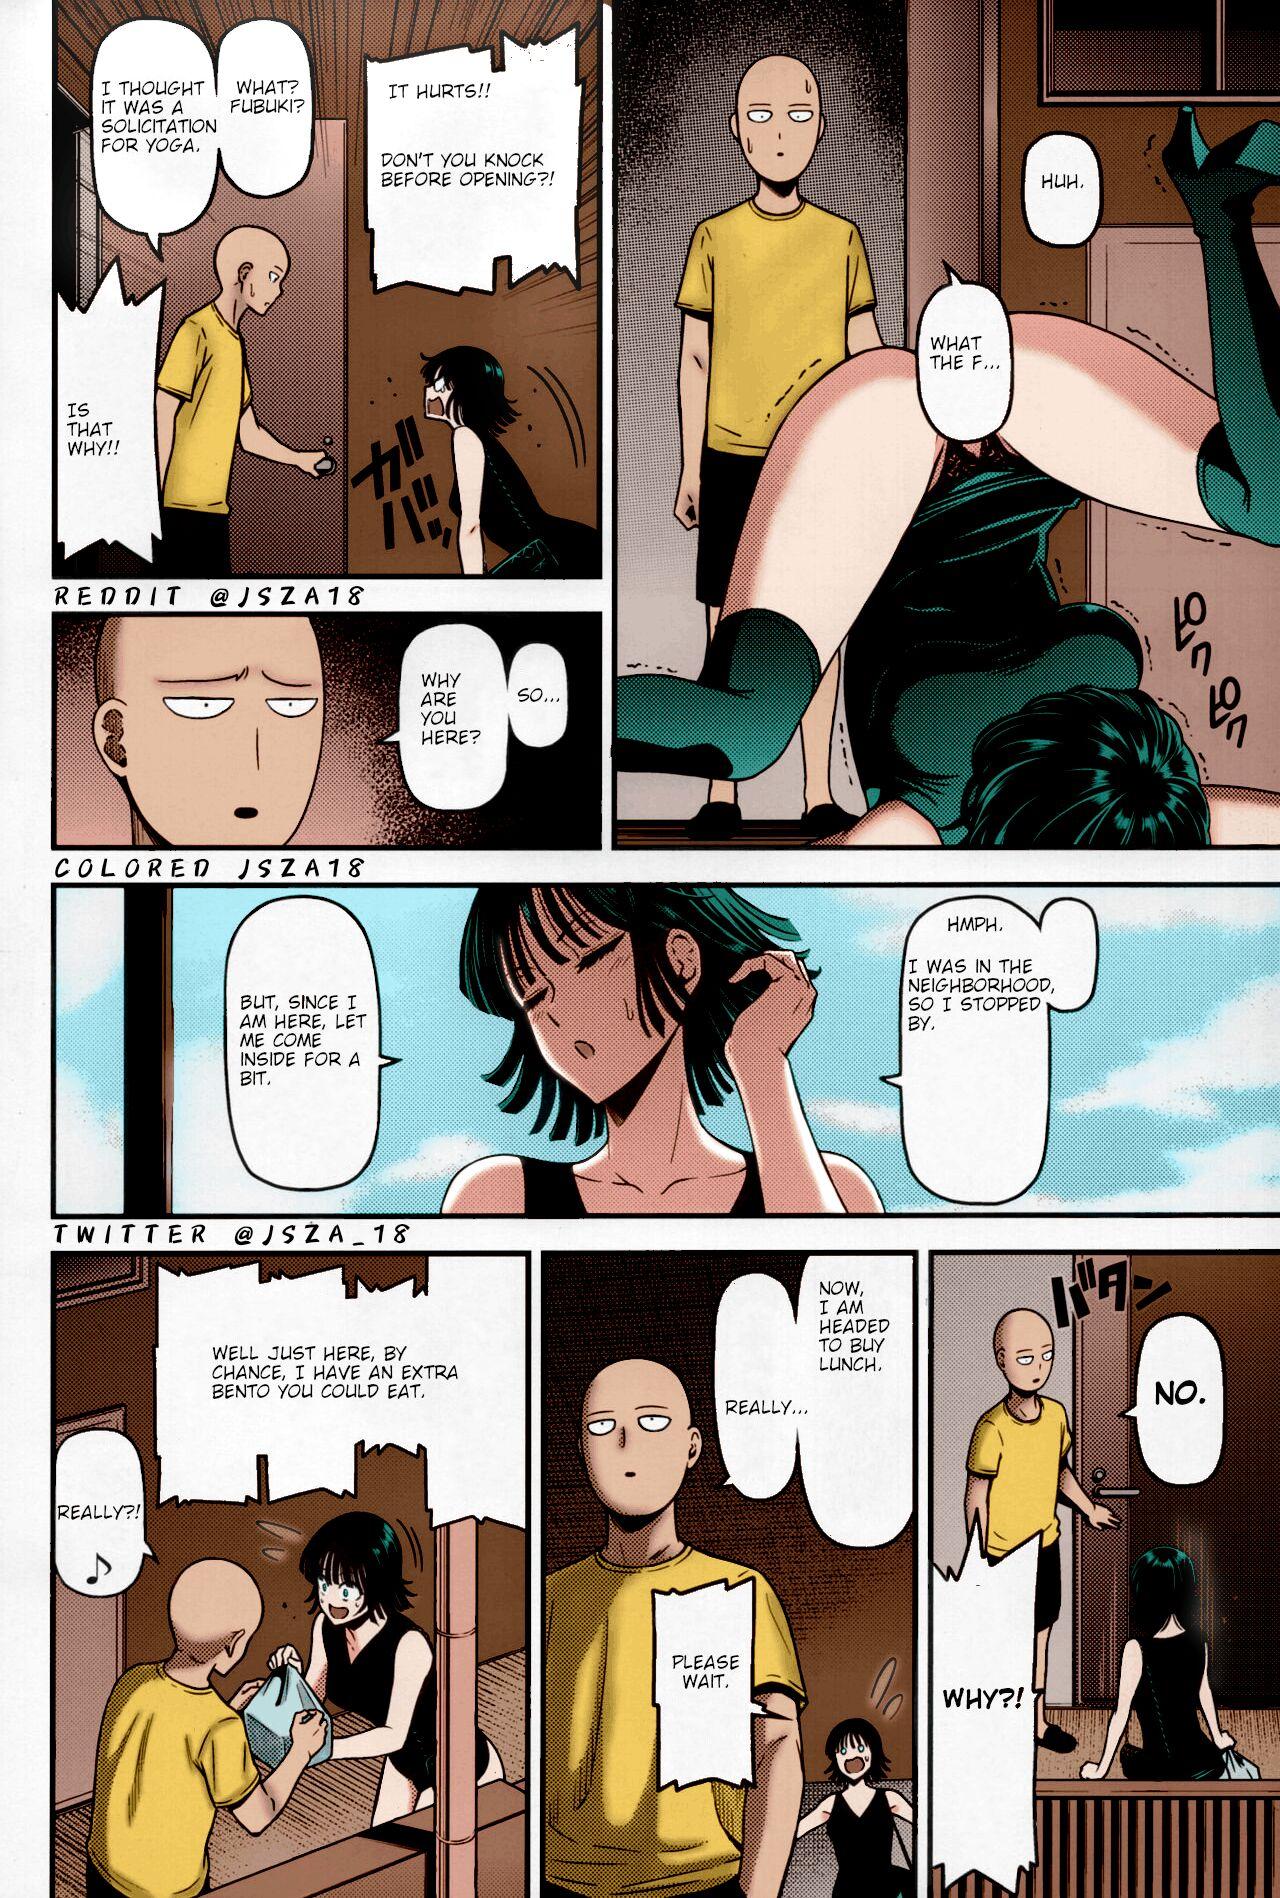 Real Orgasms ONE-HURRICANE 6 - One punch man Amateur Porno - Page 3